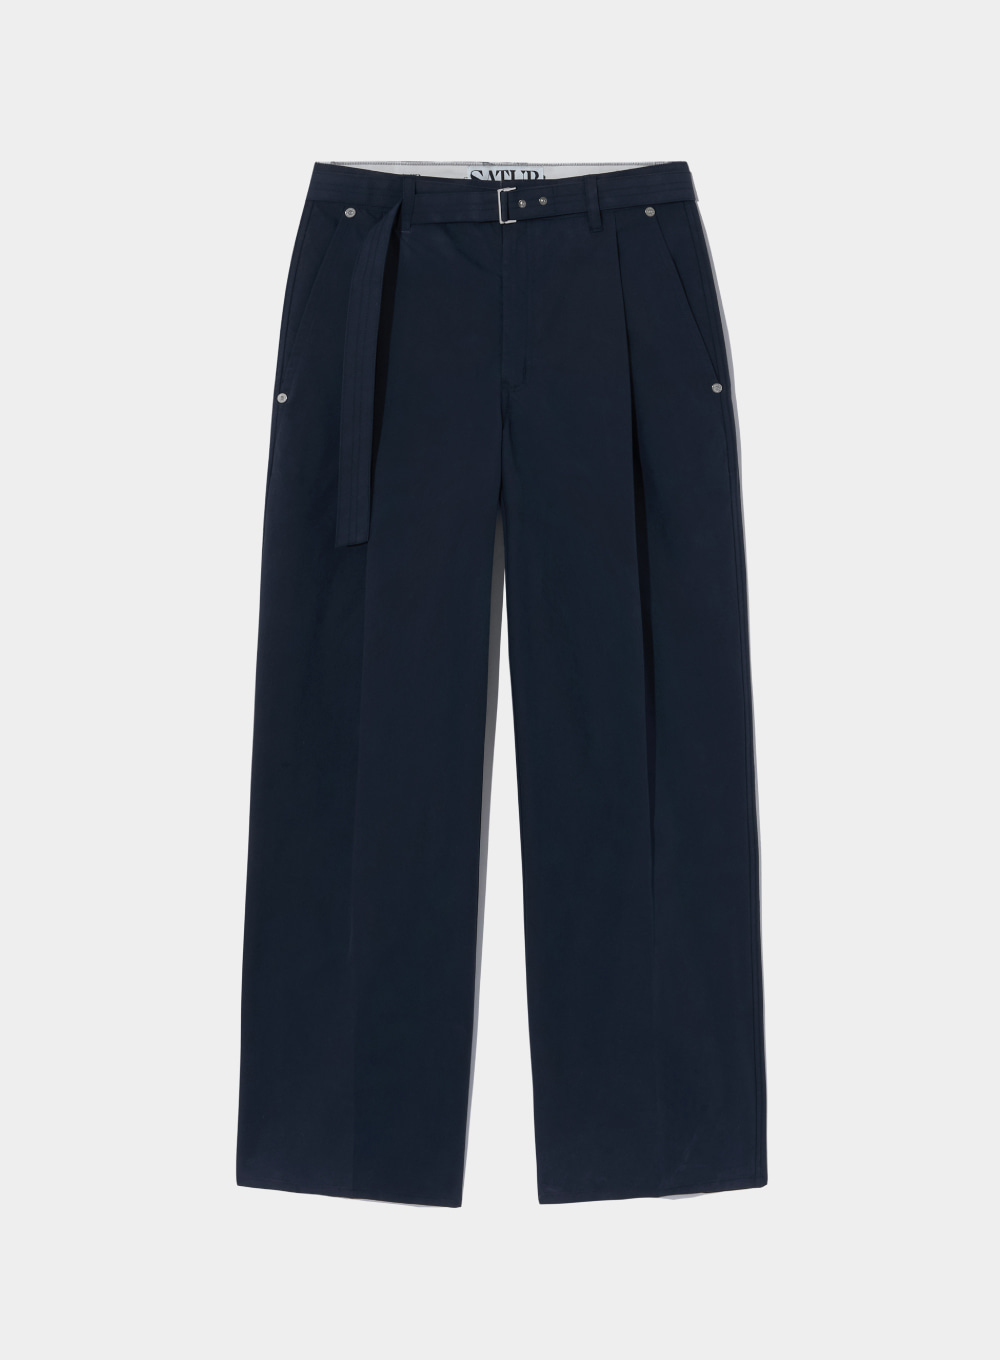 Tallinn One Tuck Tailored Belted Chino Pants - Classic Navy